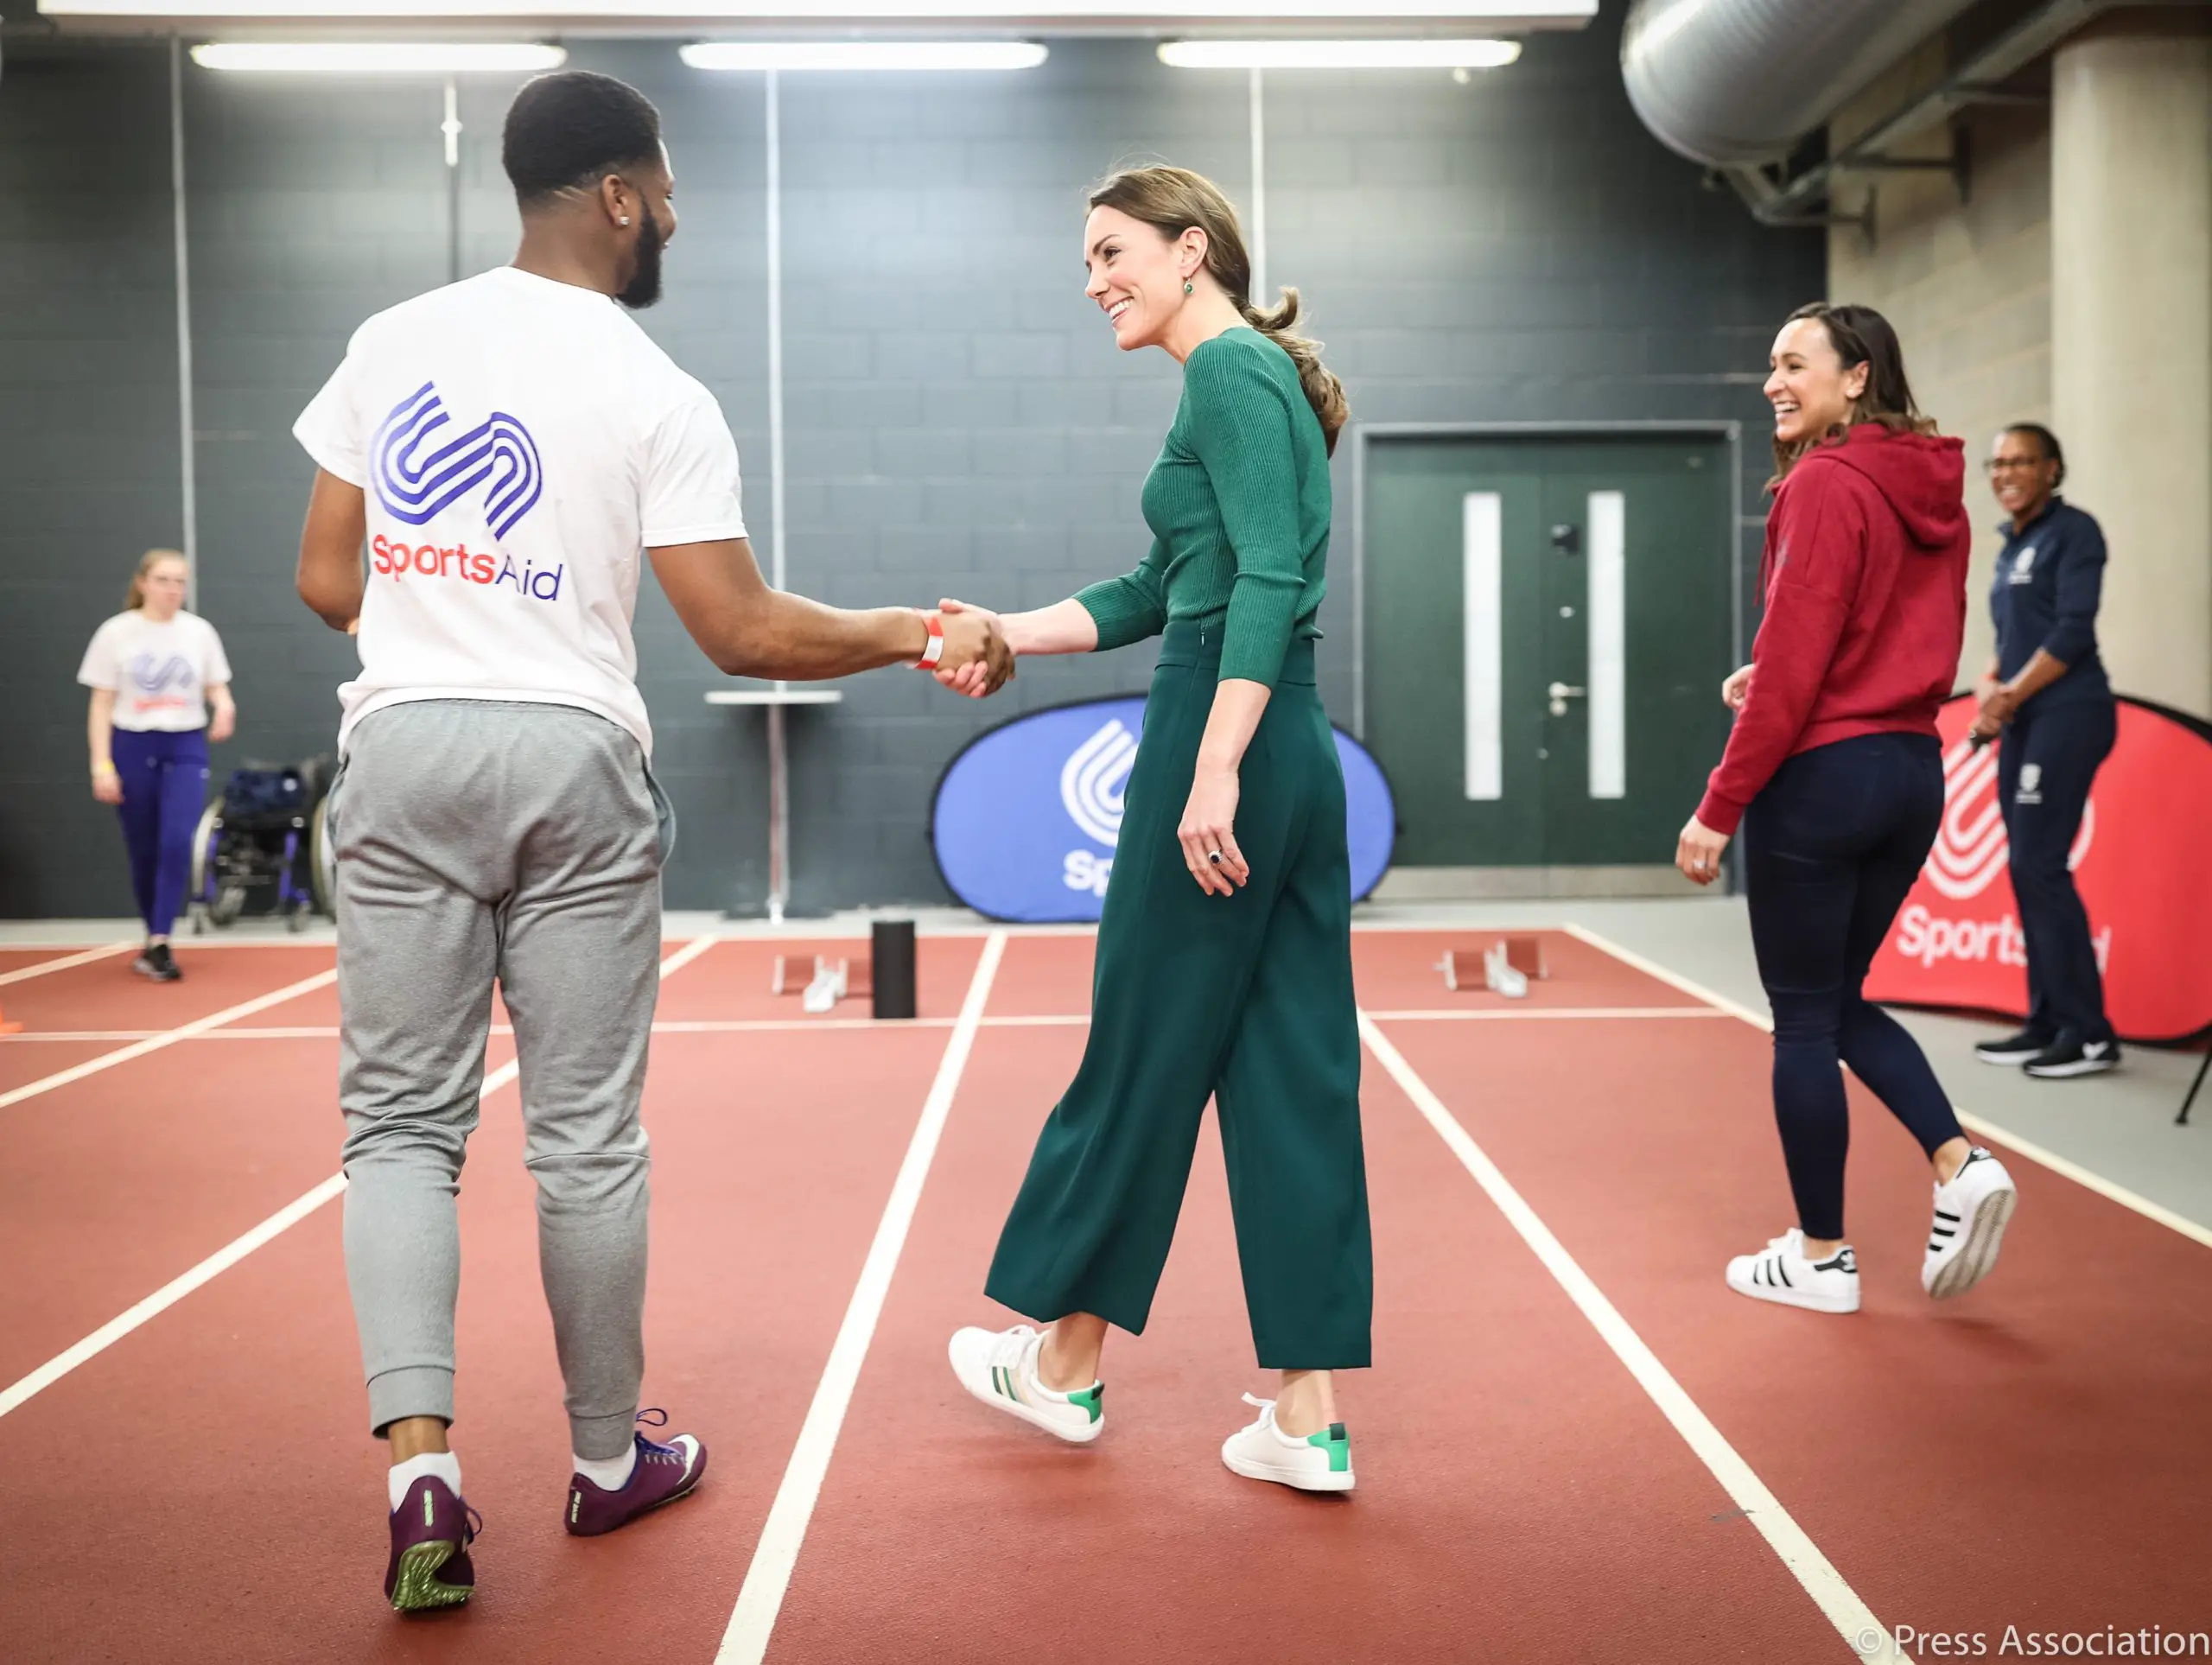 The Duchess of Cambridge attended SportsAid event at London Stadium wearing Green zara culottes